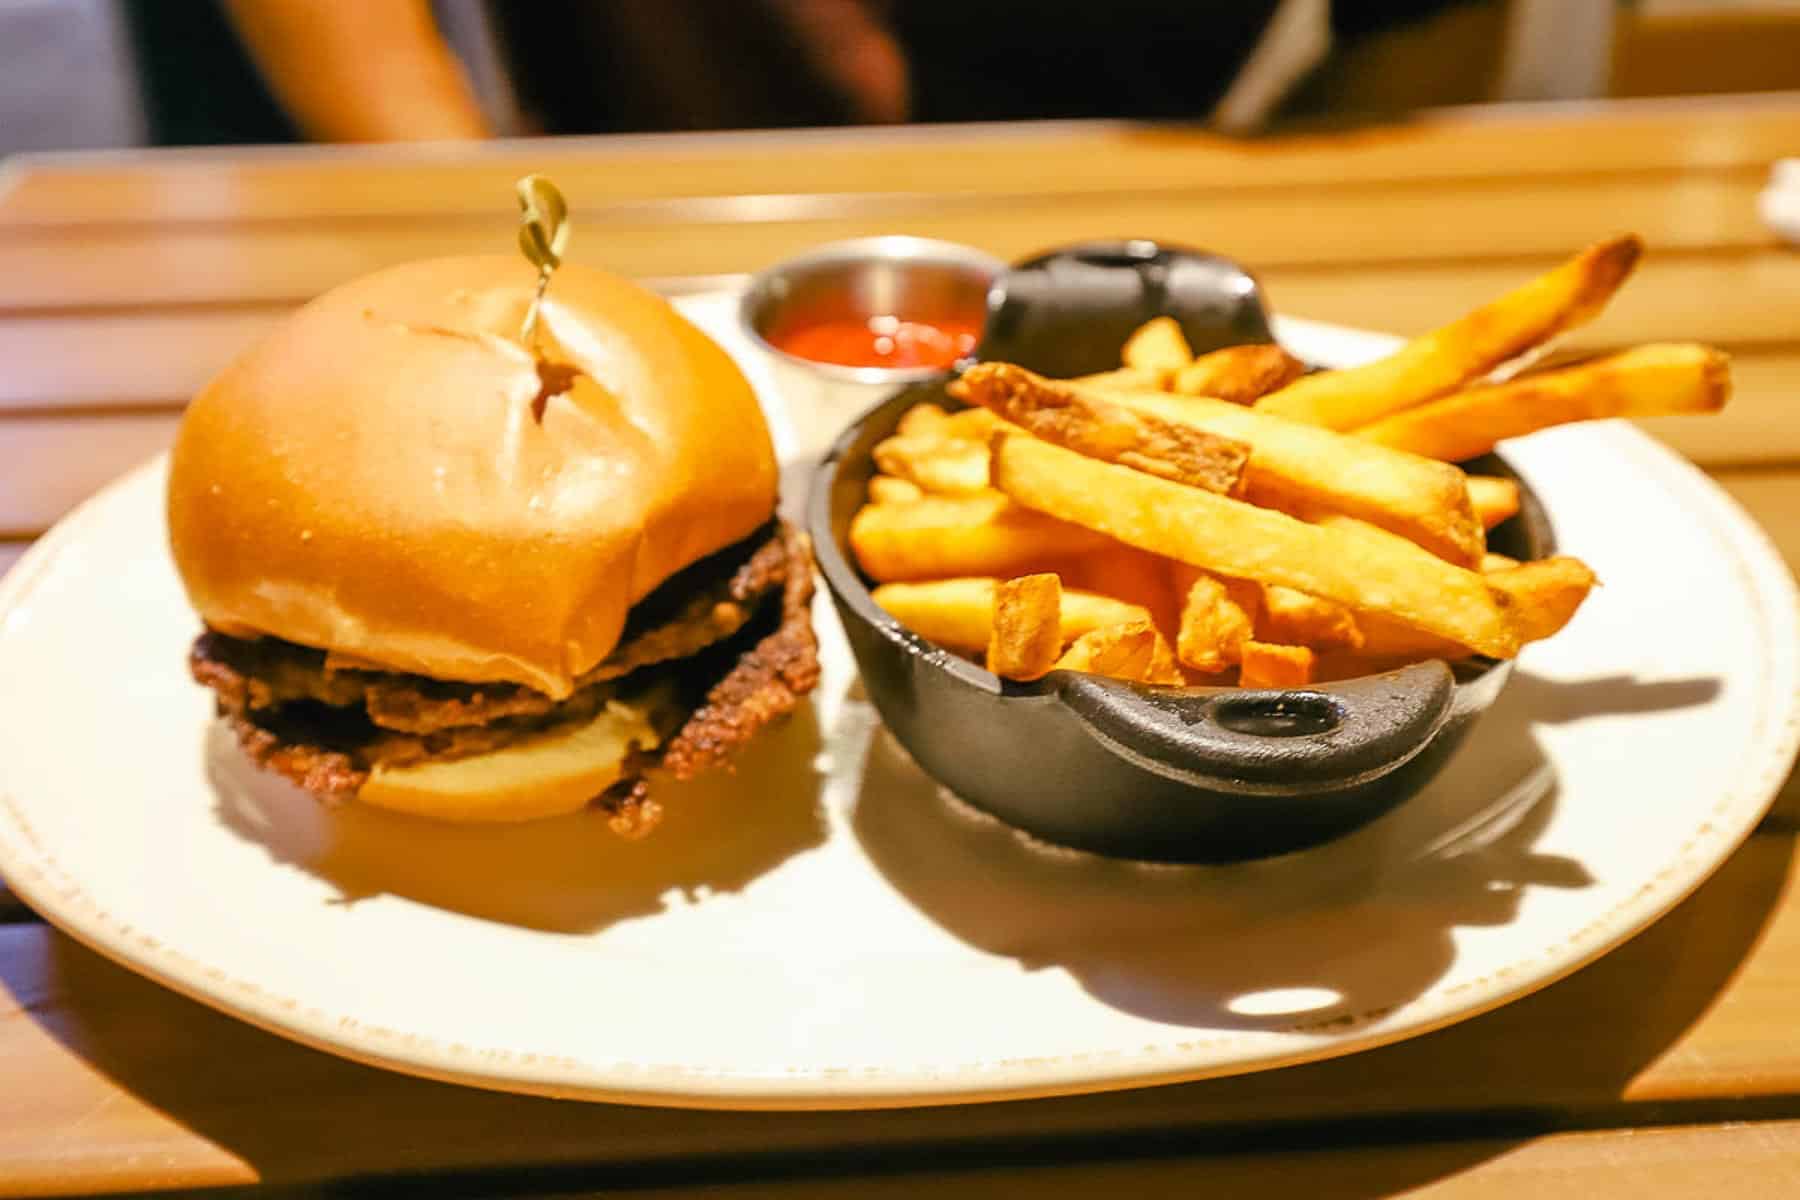 Chef Art's Burger with fries 